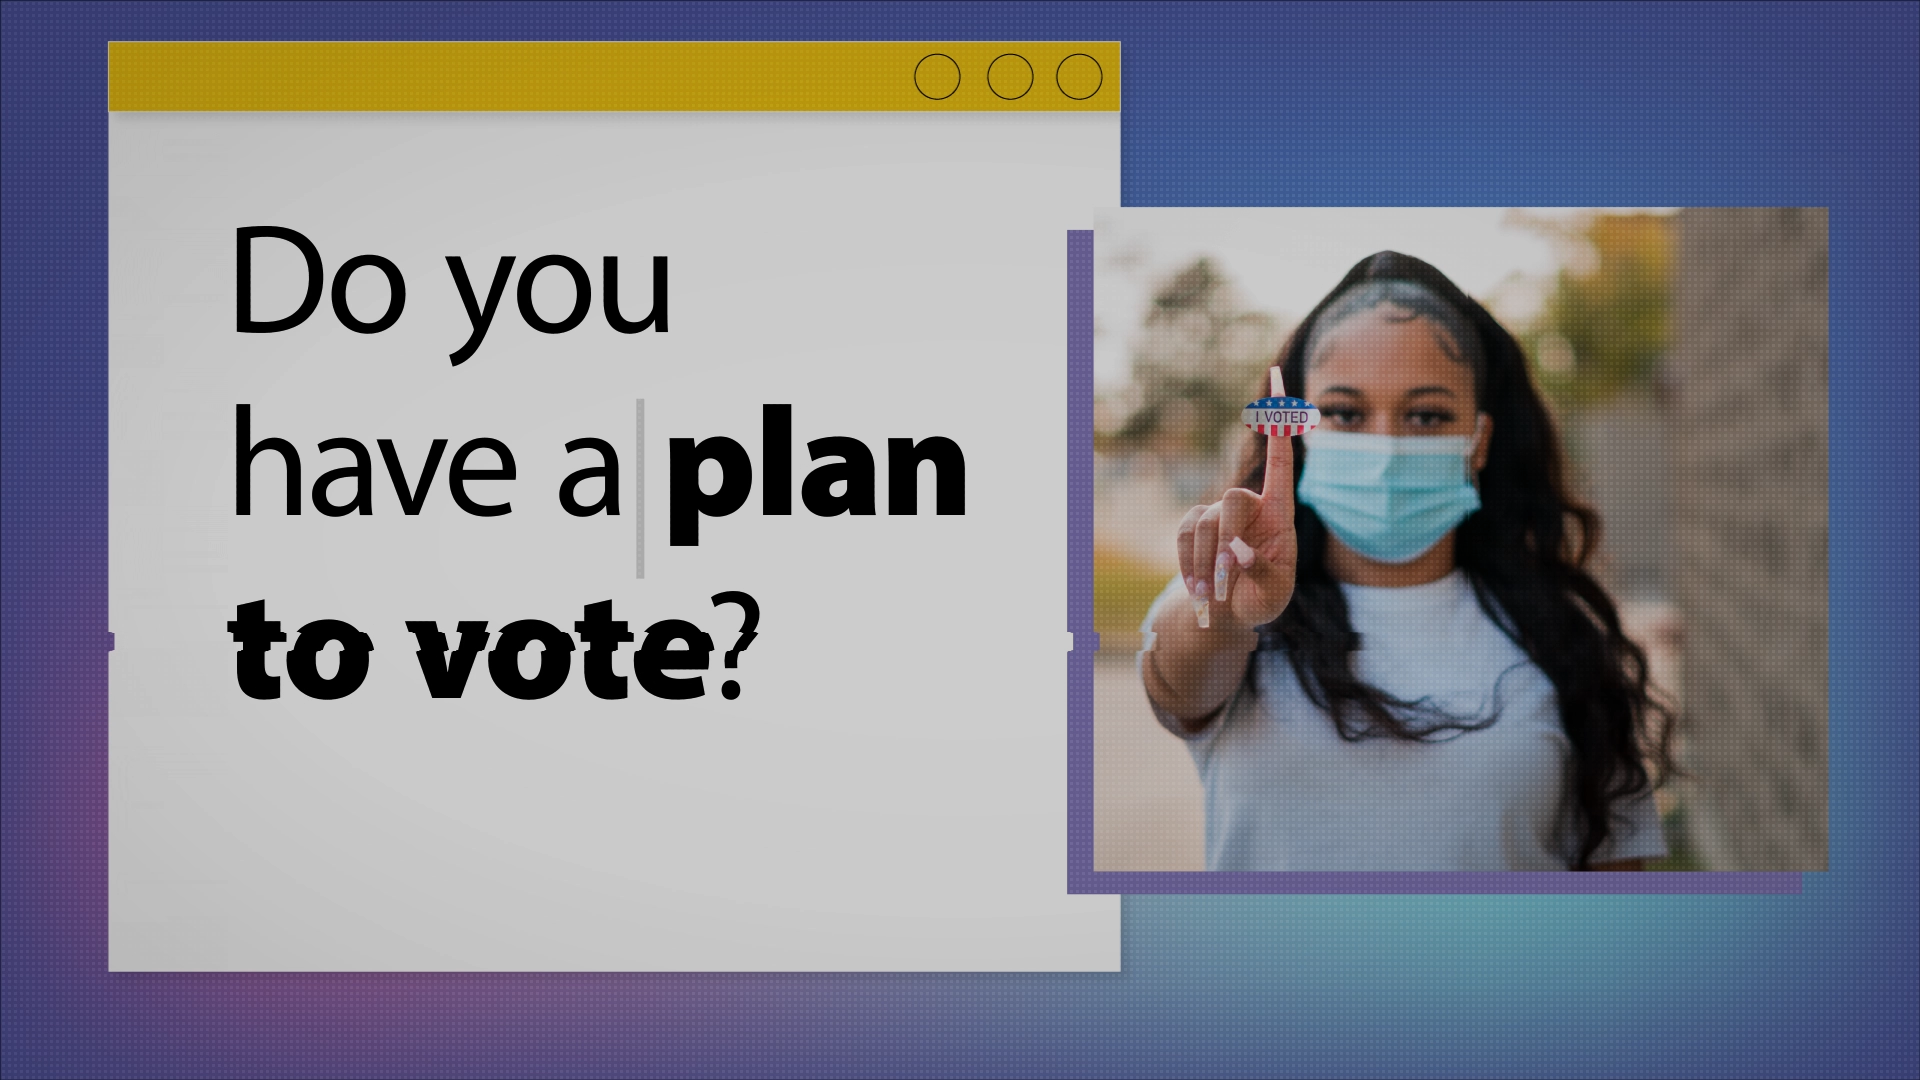 A white digital note that reads "Do you have a plan to vote?" next to an image of a young Black woman wearing a surgical mask holding an "I voted" sticker.